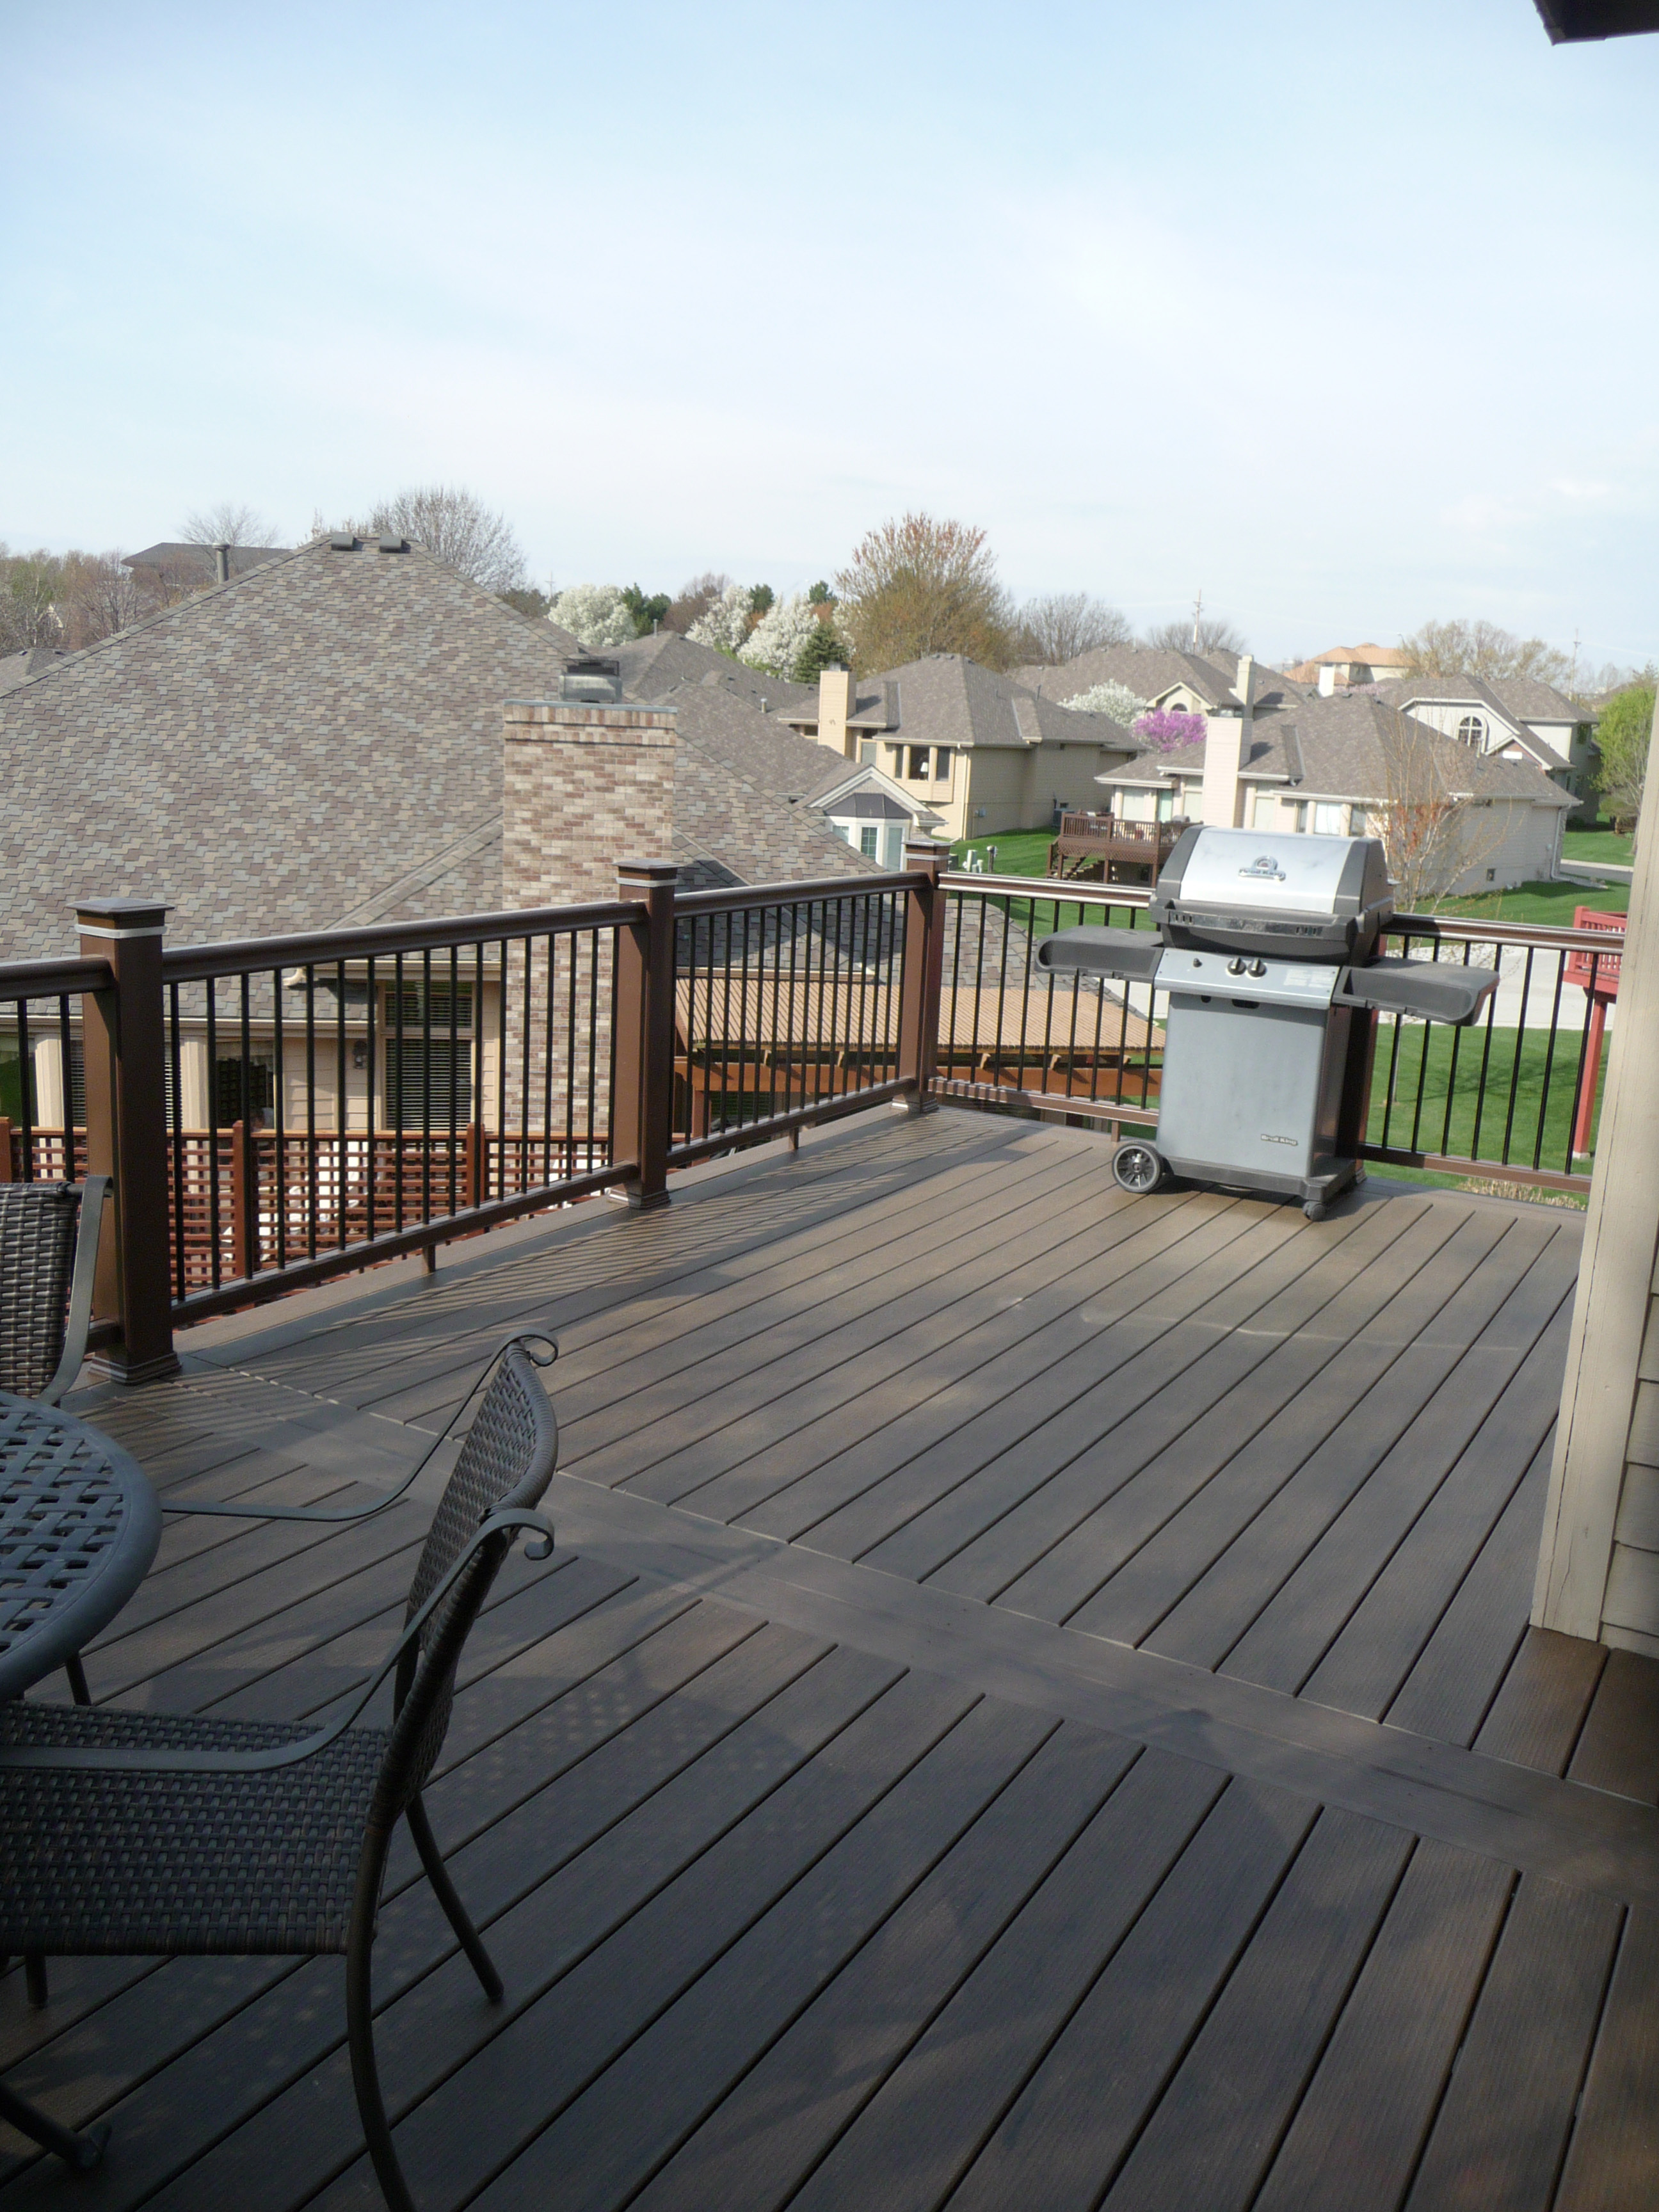 The family plans to keep grilling and were planning a party to celebrate their new TimberTech Legacy deck.